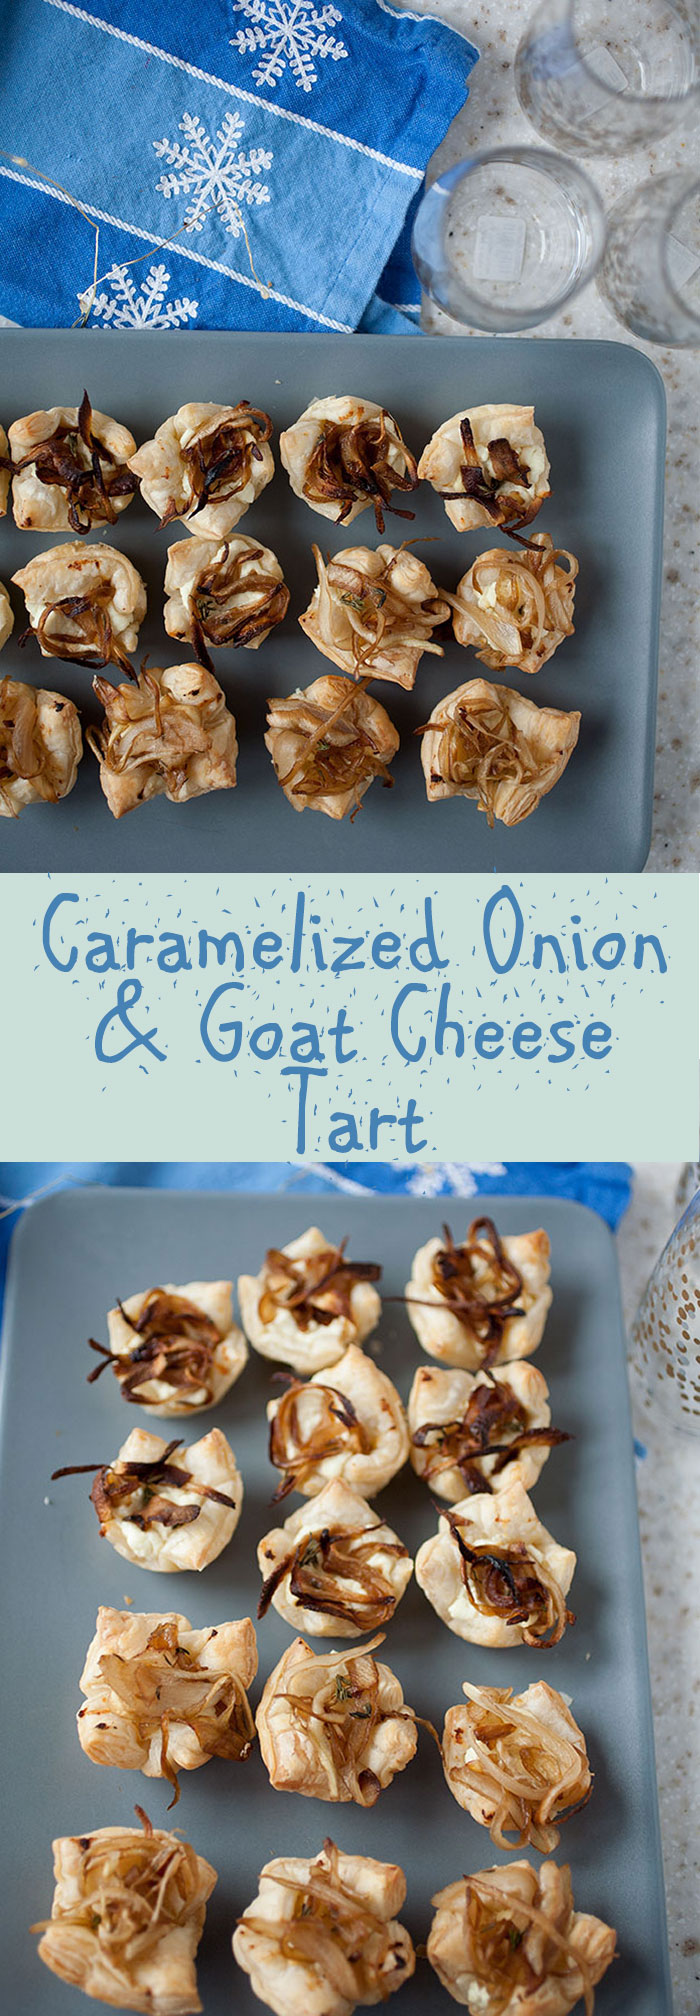 These caramelized onion and goat cheese tarts only require a handful of ingredients, aren’t very labor intensive, and the sweet-savory flavors meld perfectly in the flaky pastry crust! These holiday appeetizers will fly off the plate!